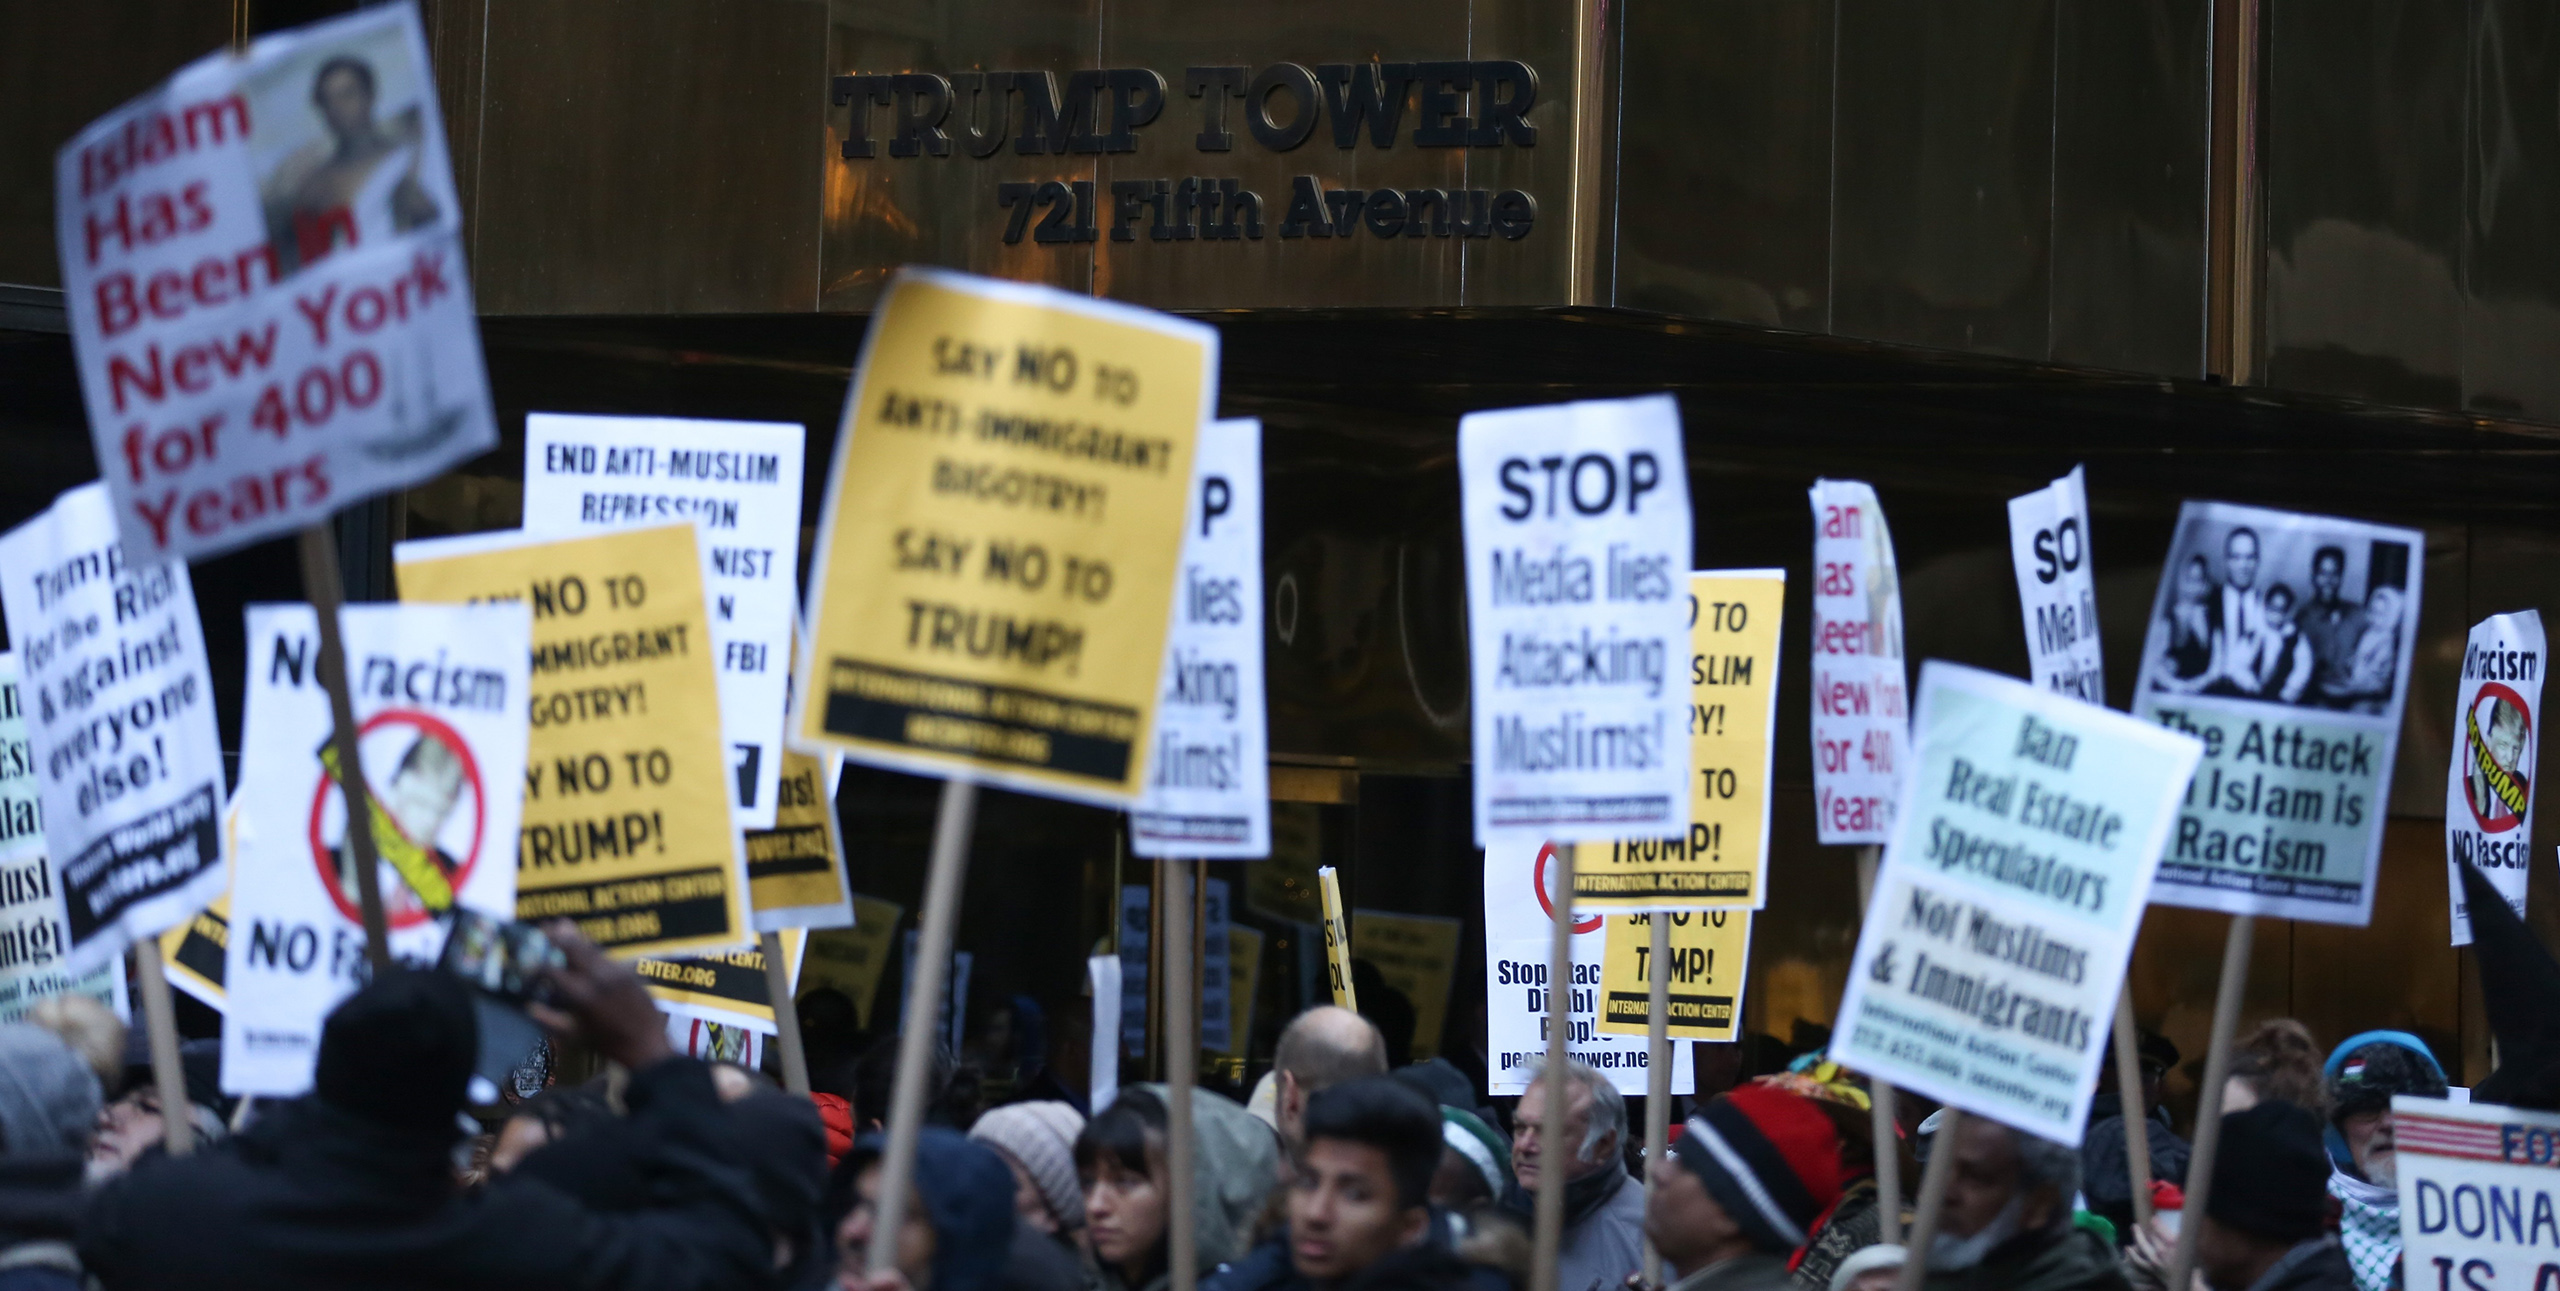 People stage a protest against Donald Trump after he made comments stating that he wants a 'total and complete shutdown of Muslims entering the United States' in front of the Trump Tower at 5th Avenue in New York City on Dec. 20, 2015. (Cem Ozdel—Anadolu Agency/Getty Images)